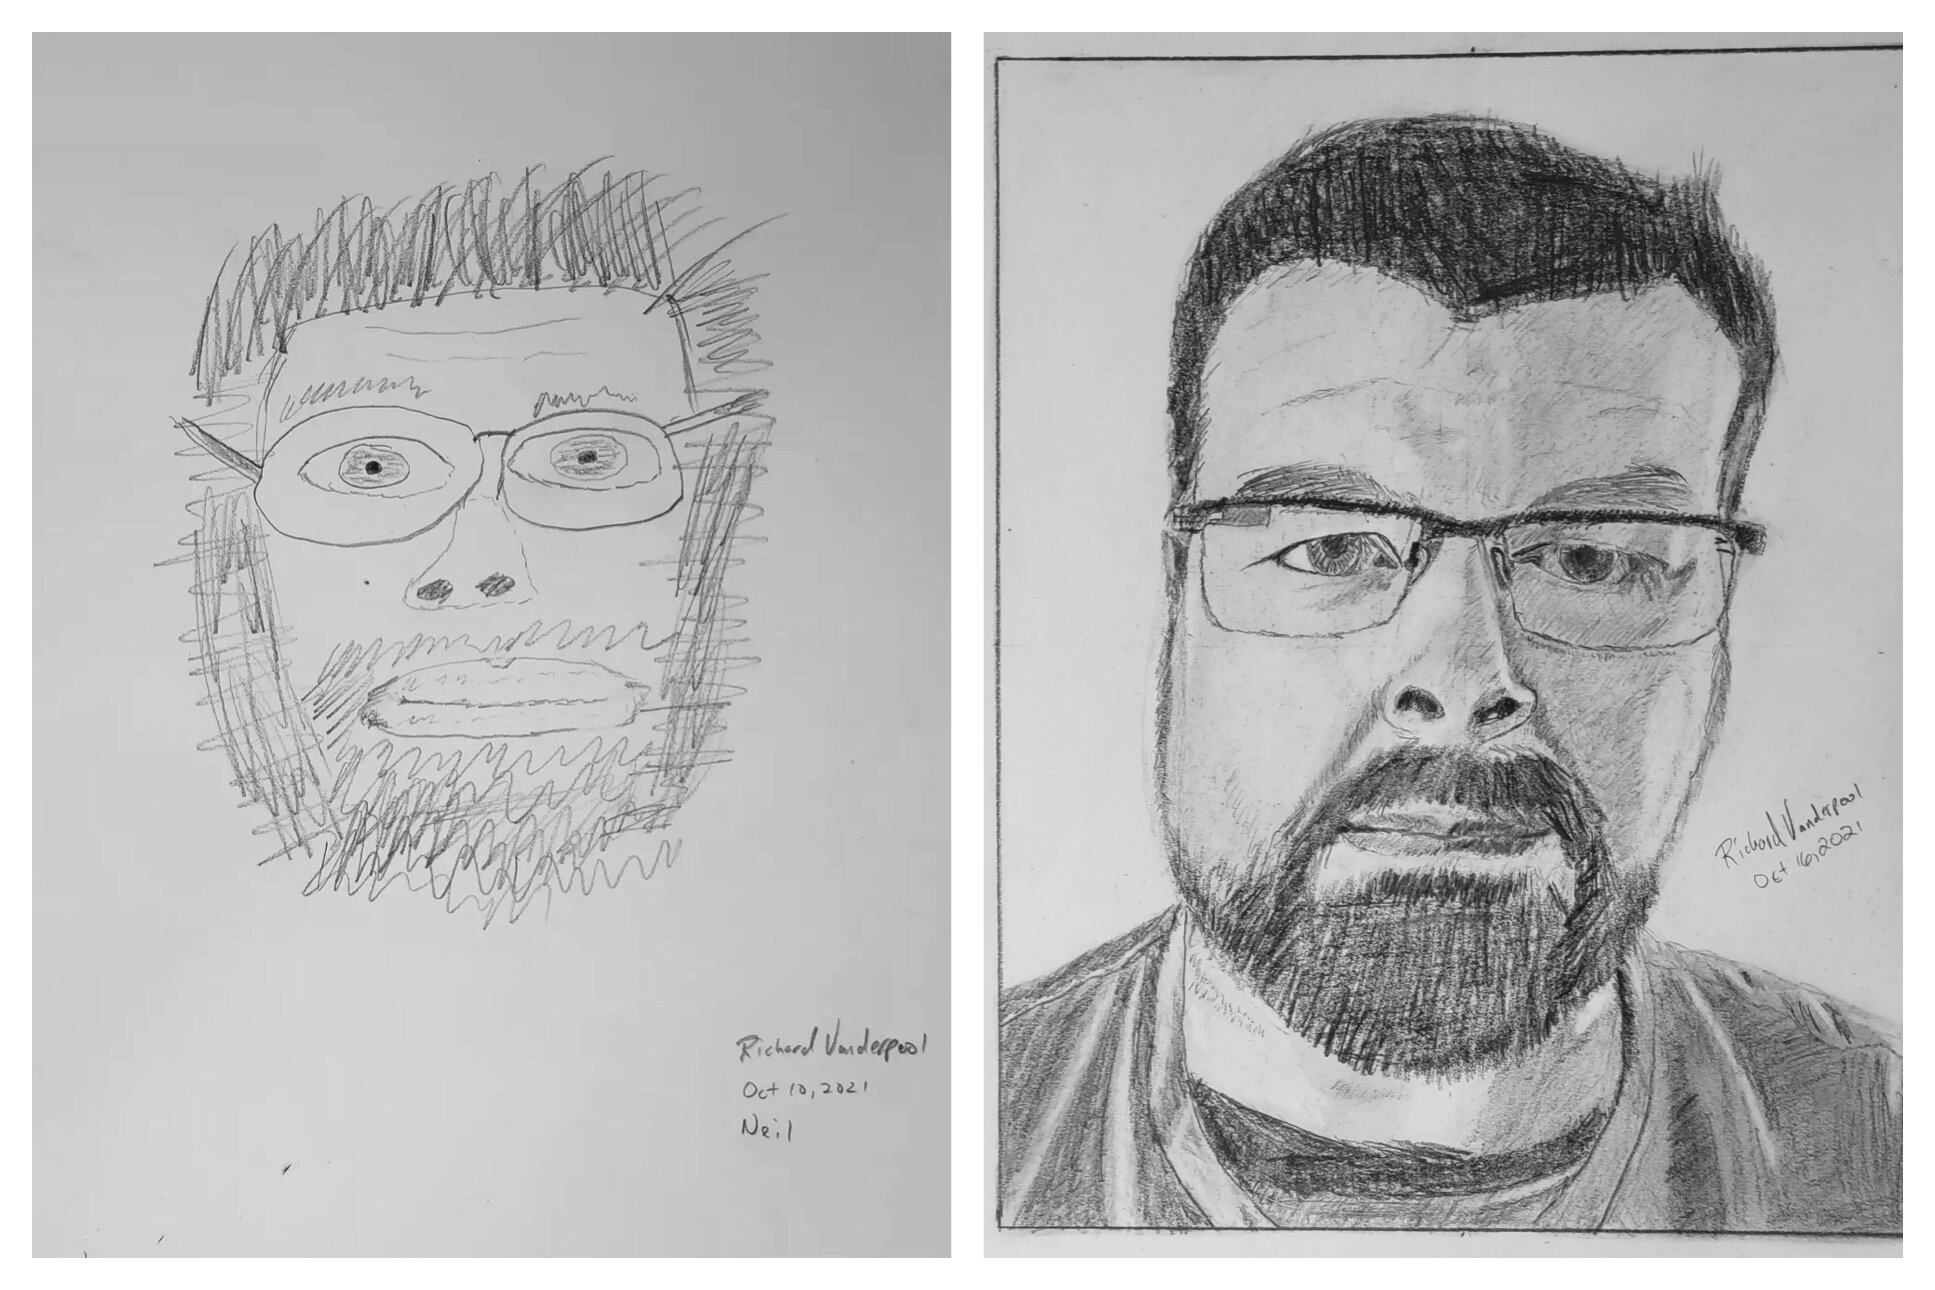 Richard's Before and After Self Portrait Drawings Oct 11-6, 2021